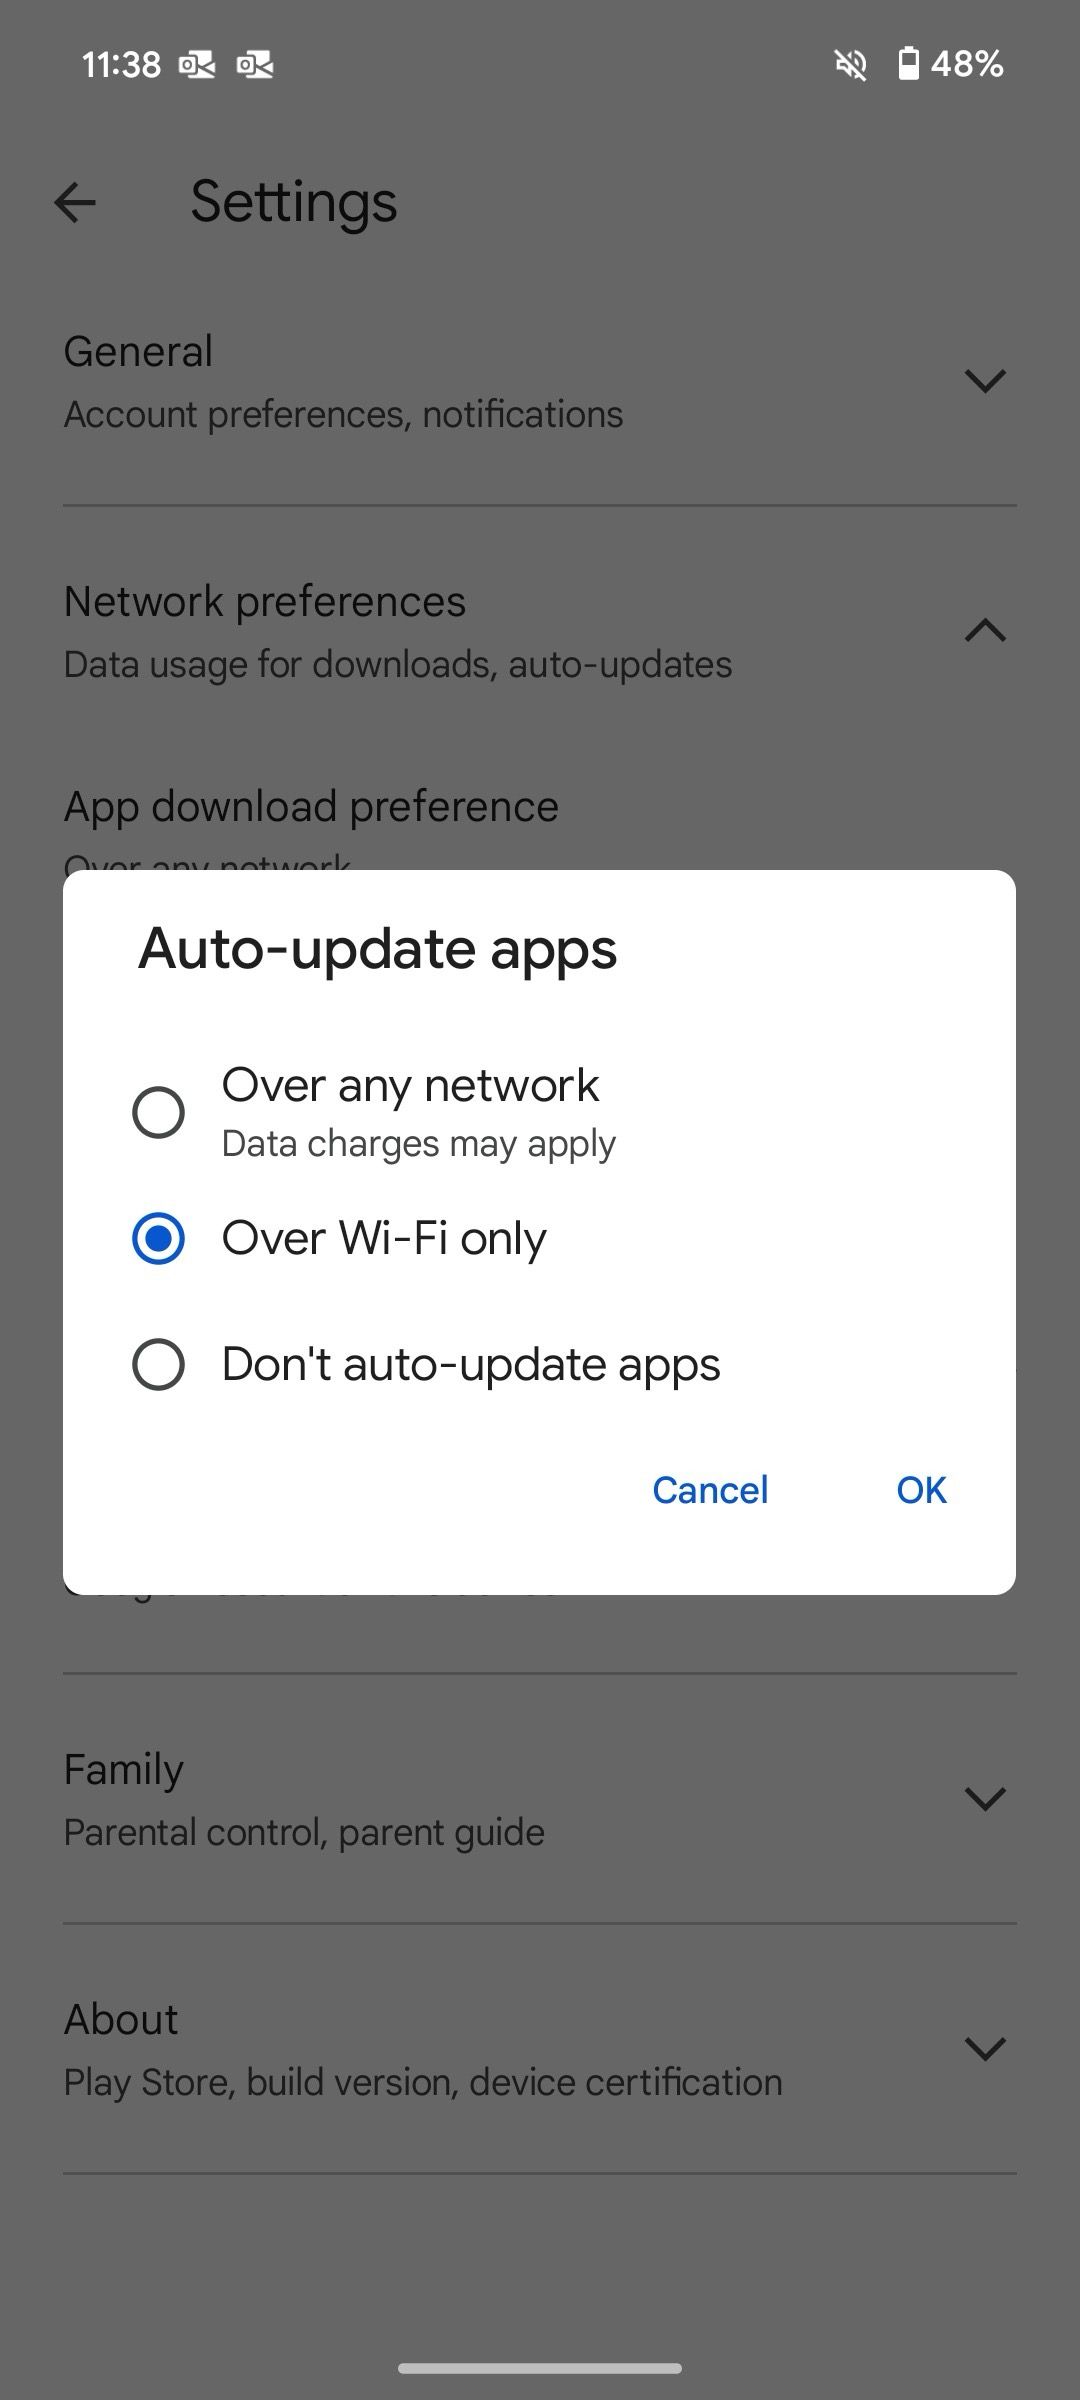 Auto-update apps on data and Wifi